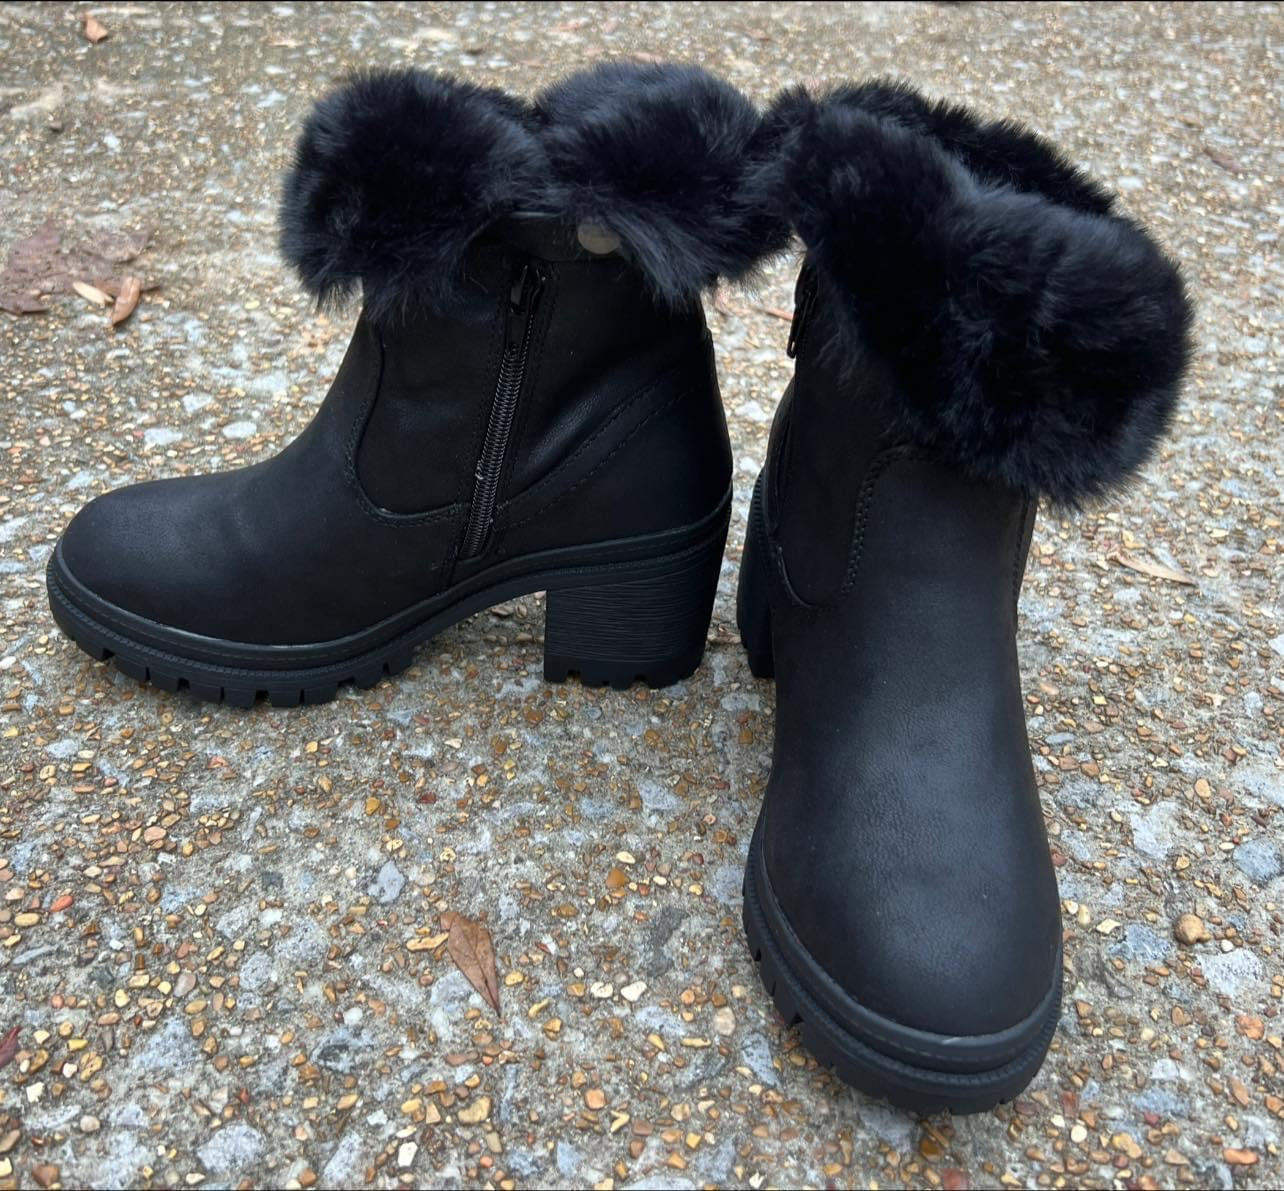 Very G black “North Park” boots